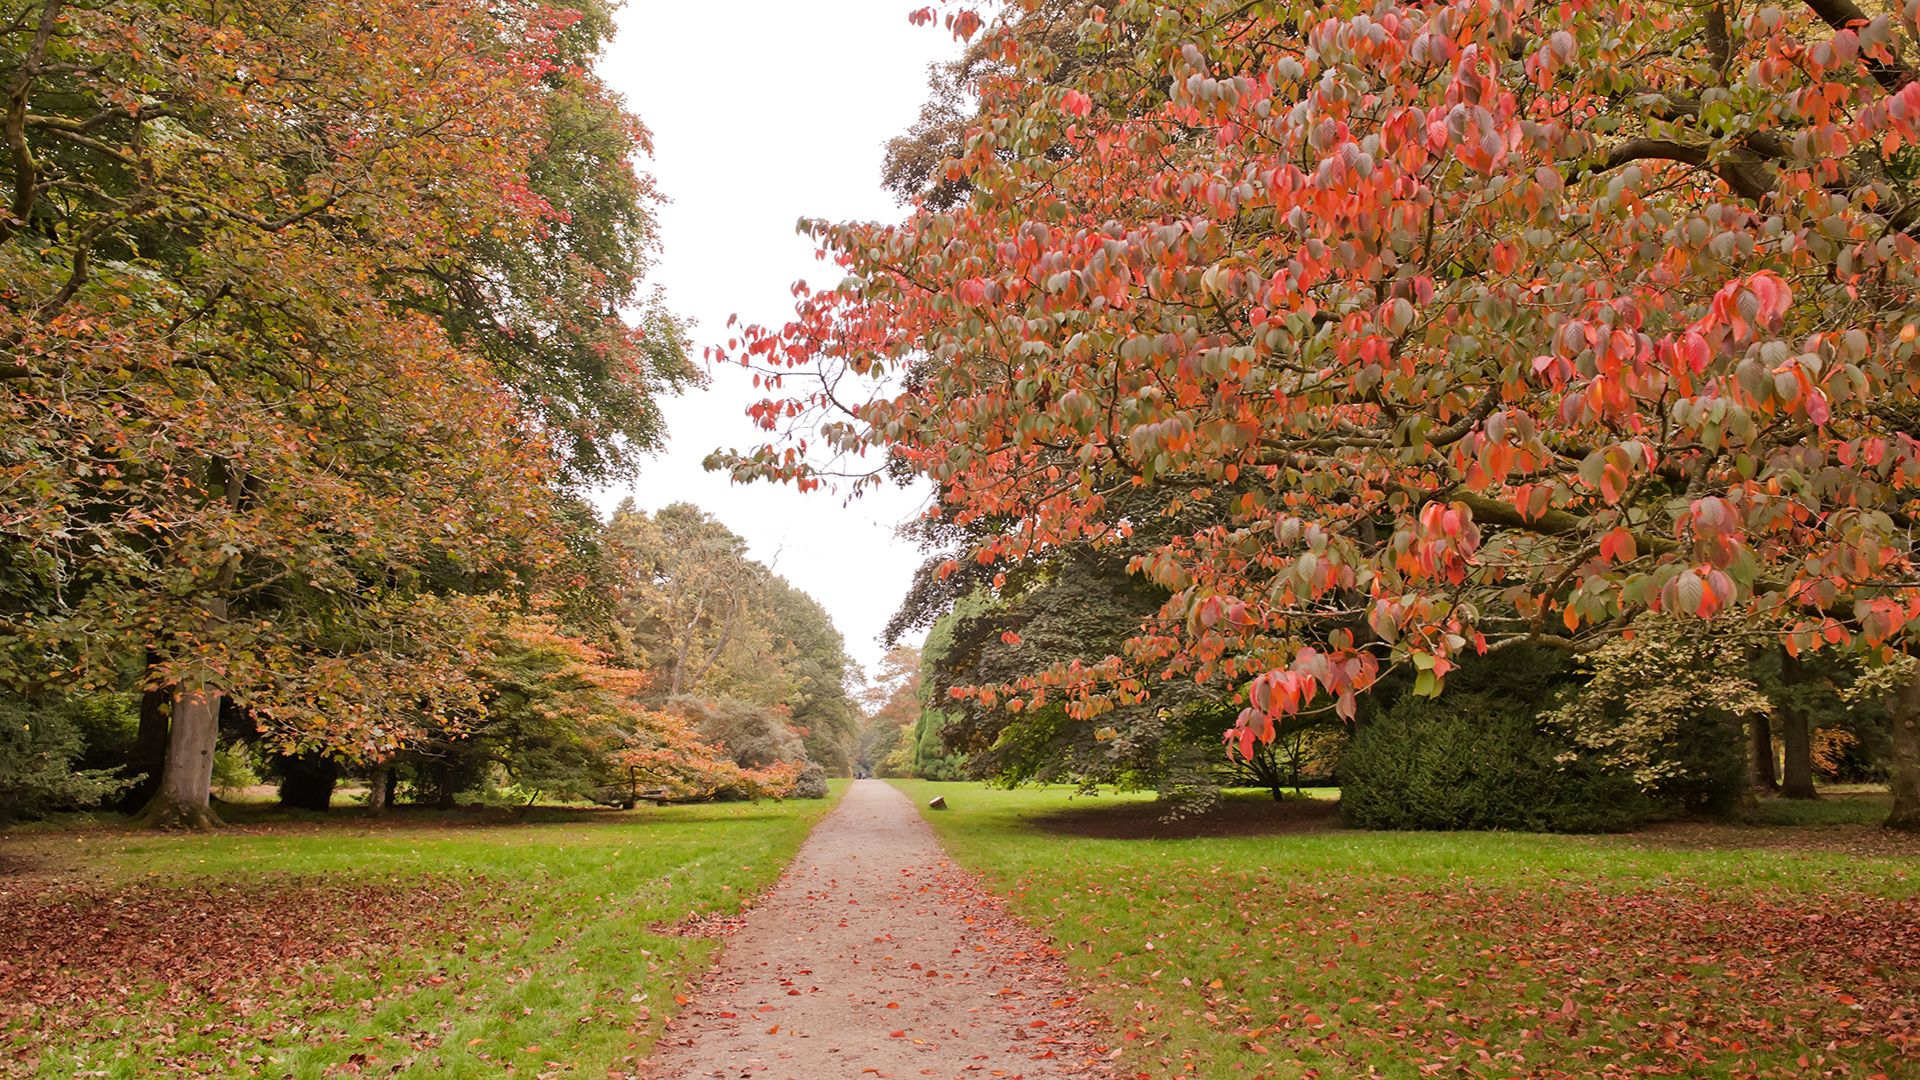 A path in Westonbirt Arboretum with trees on each side